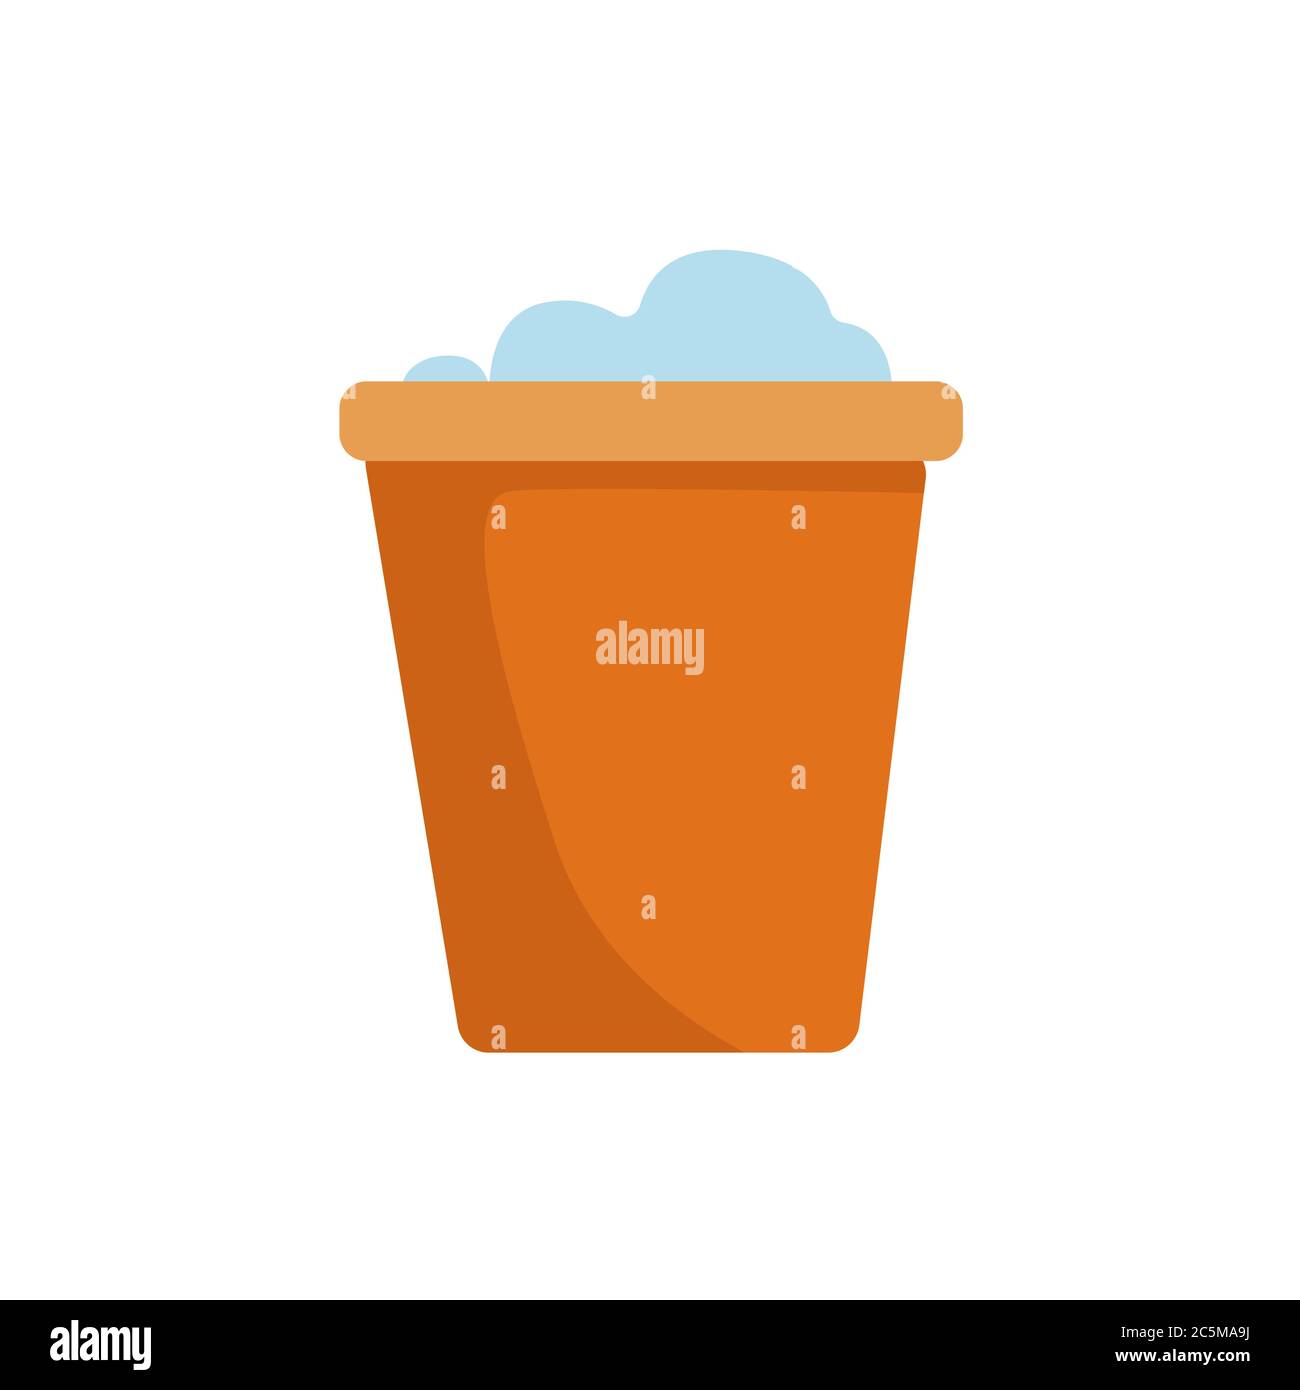 Cleaning bucket on white background. Trendy flat style for graphic design, web-site. Vector illustration EPS 10. Stock Vector